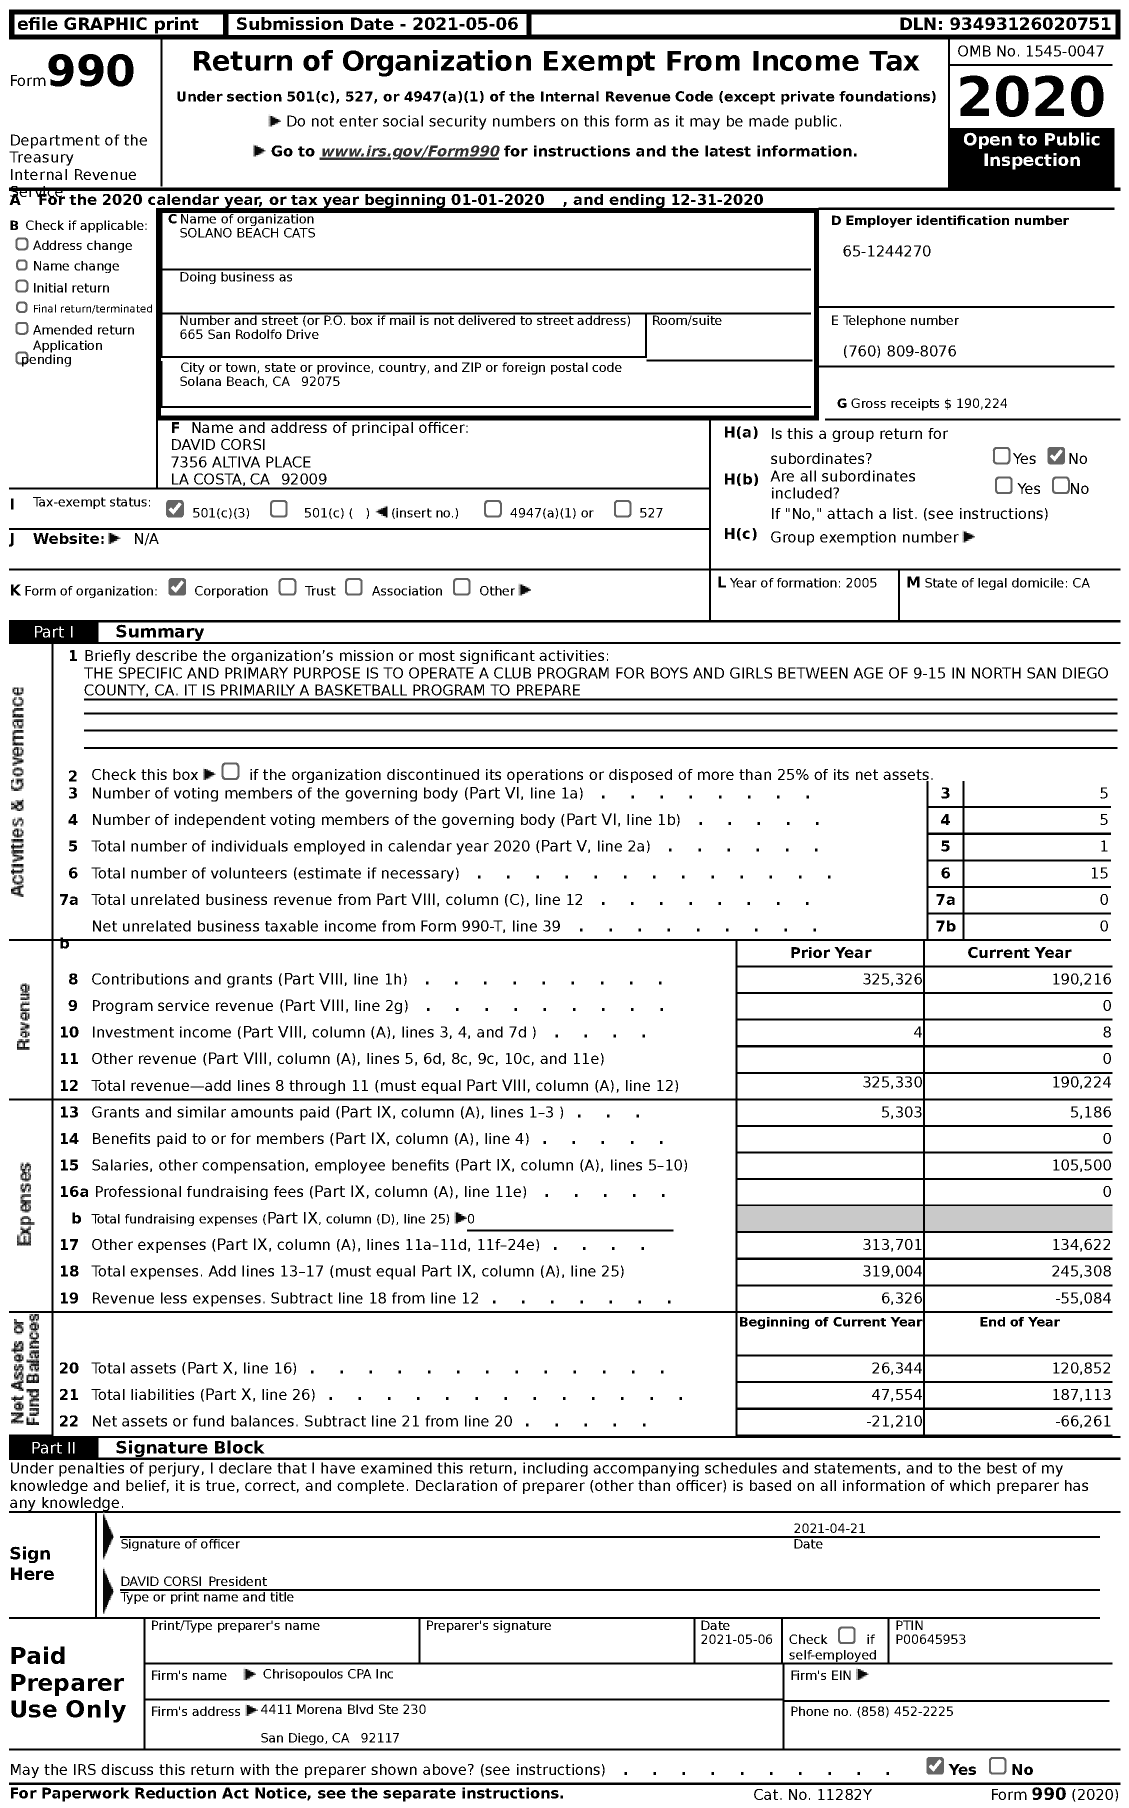 Image of first page of 2020 Form 990 for Solano Beach Cats